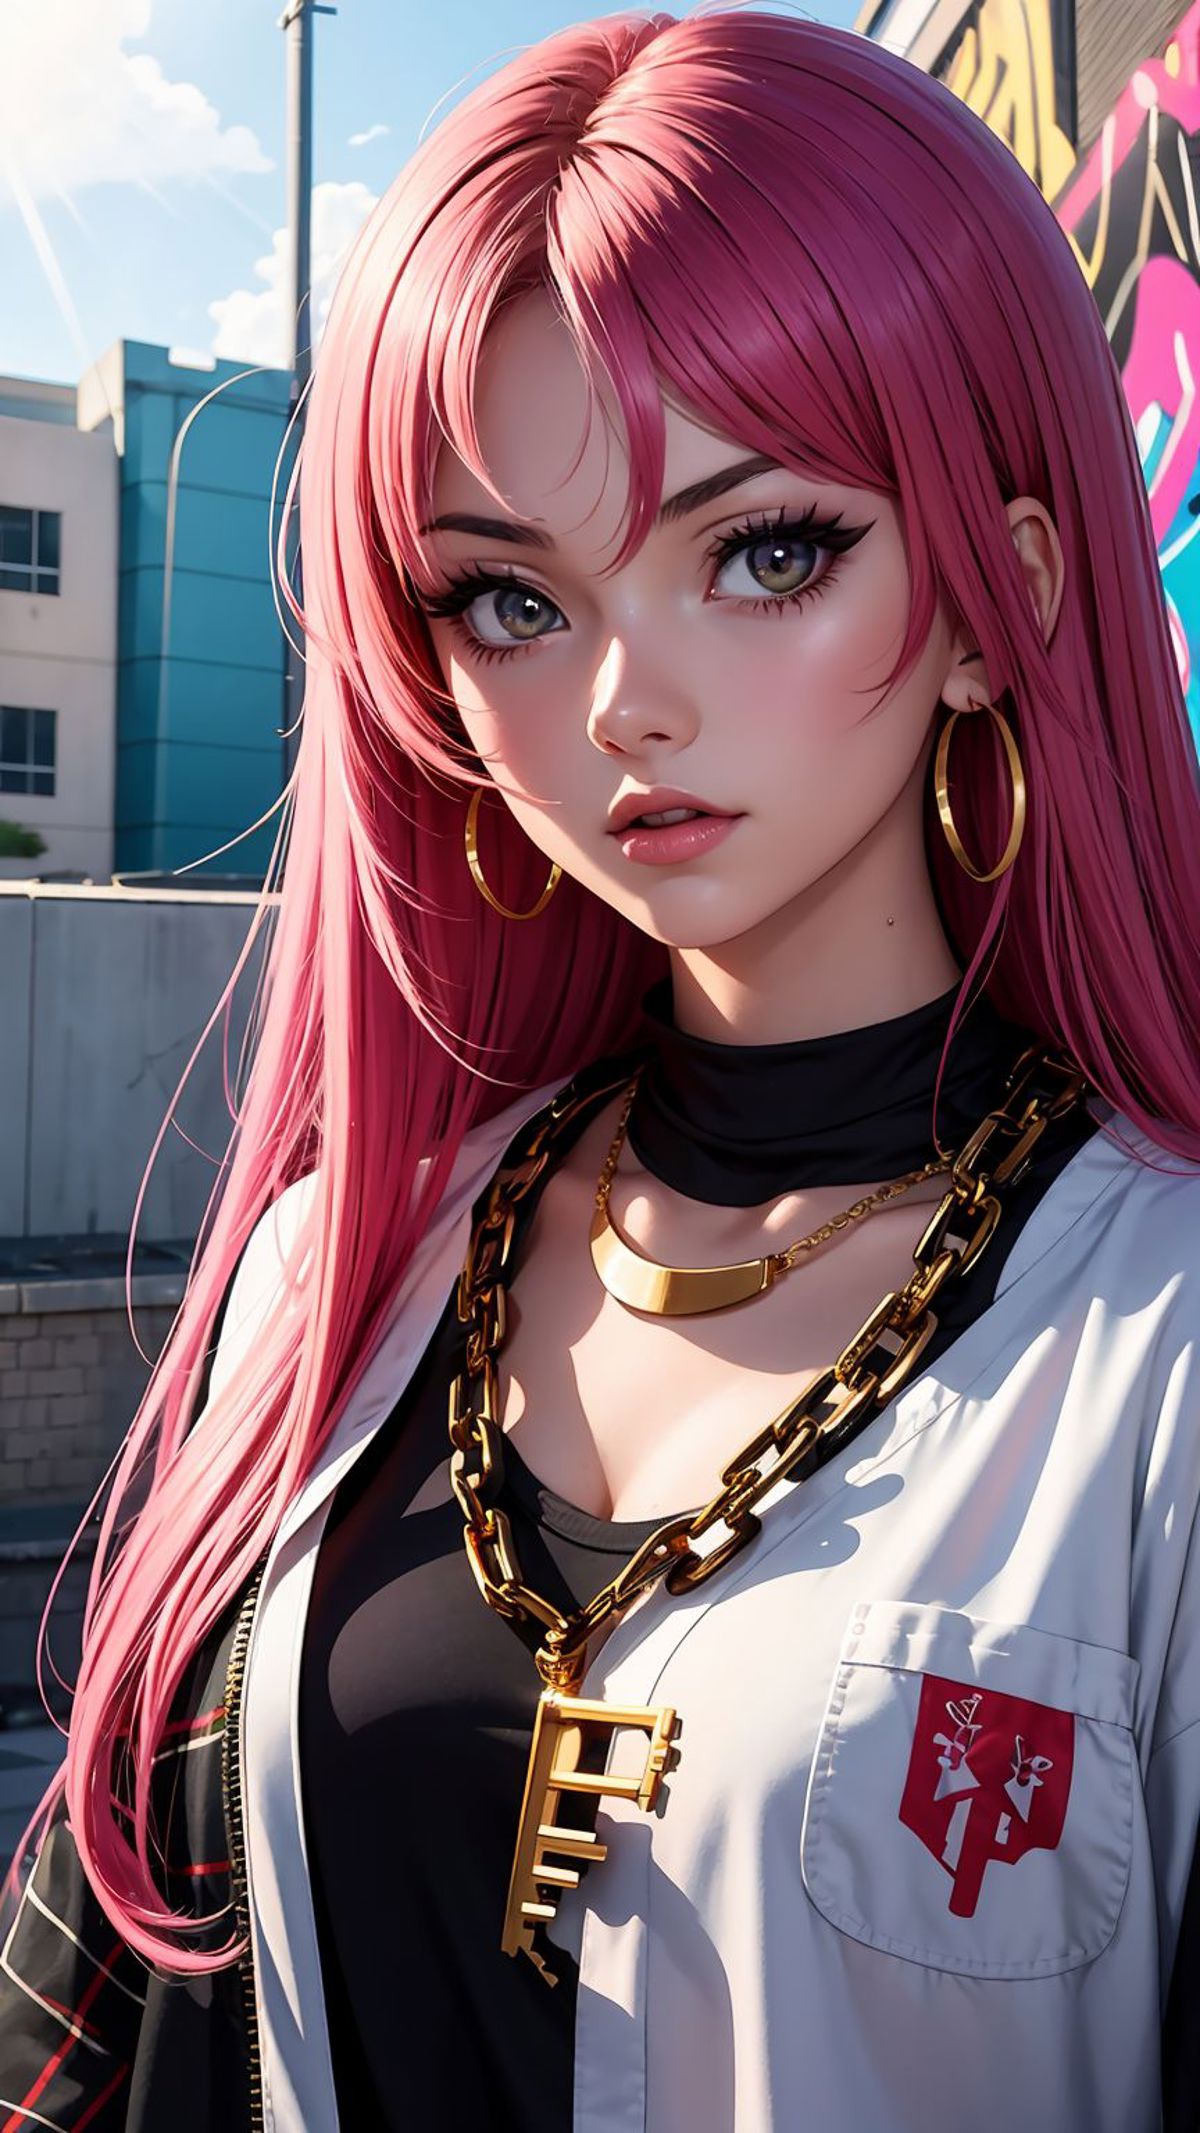 A pink-haired anime girl wearing a black shirt and chain necklace.